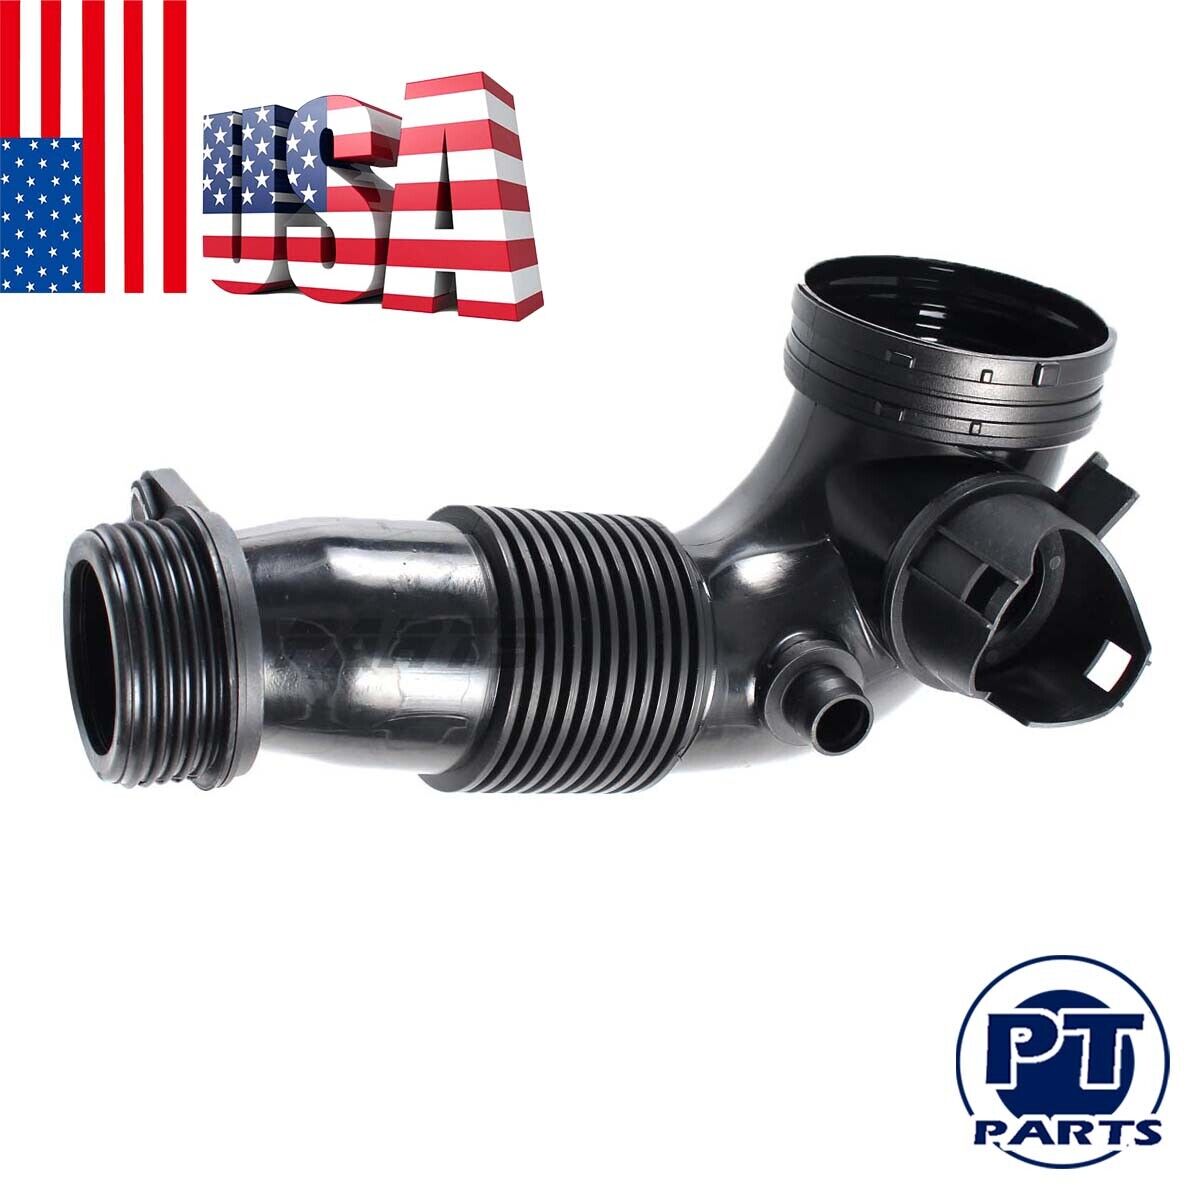 Air Intake Duct Pipe For BMW X3 X5 N20 F 10 20 30 125 228 328 528 i TurboCharger